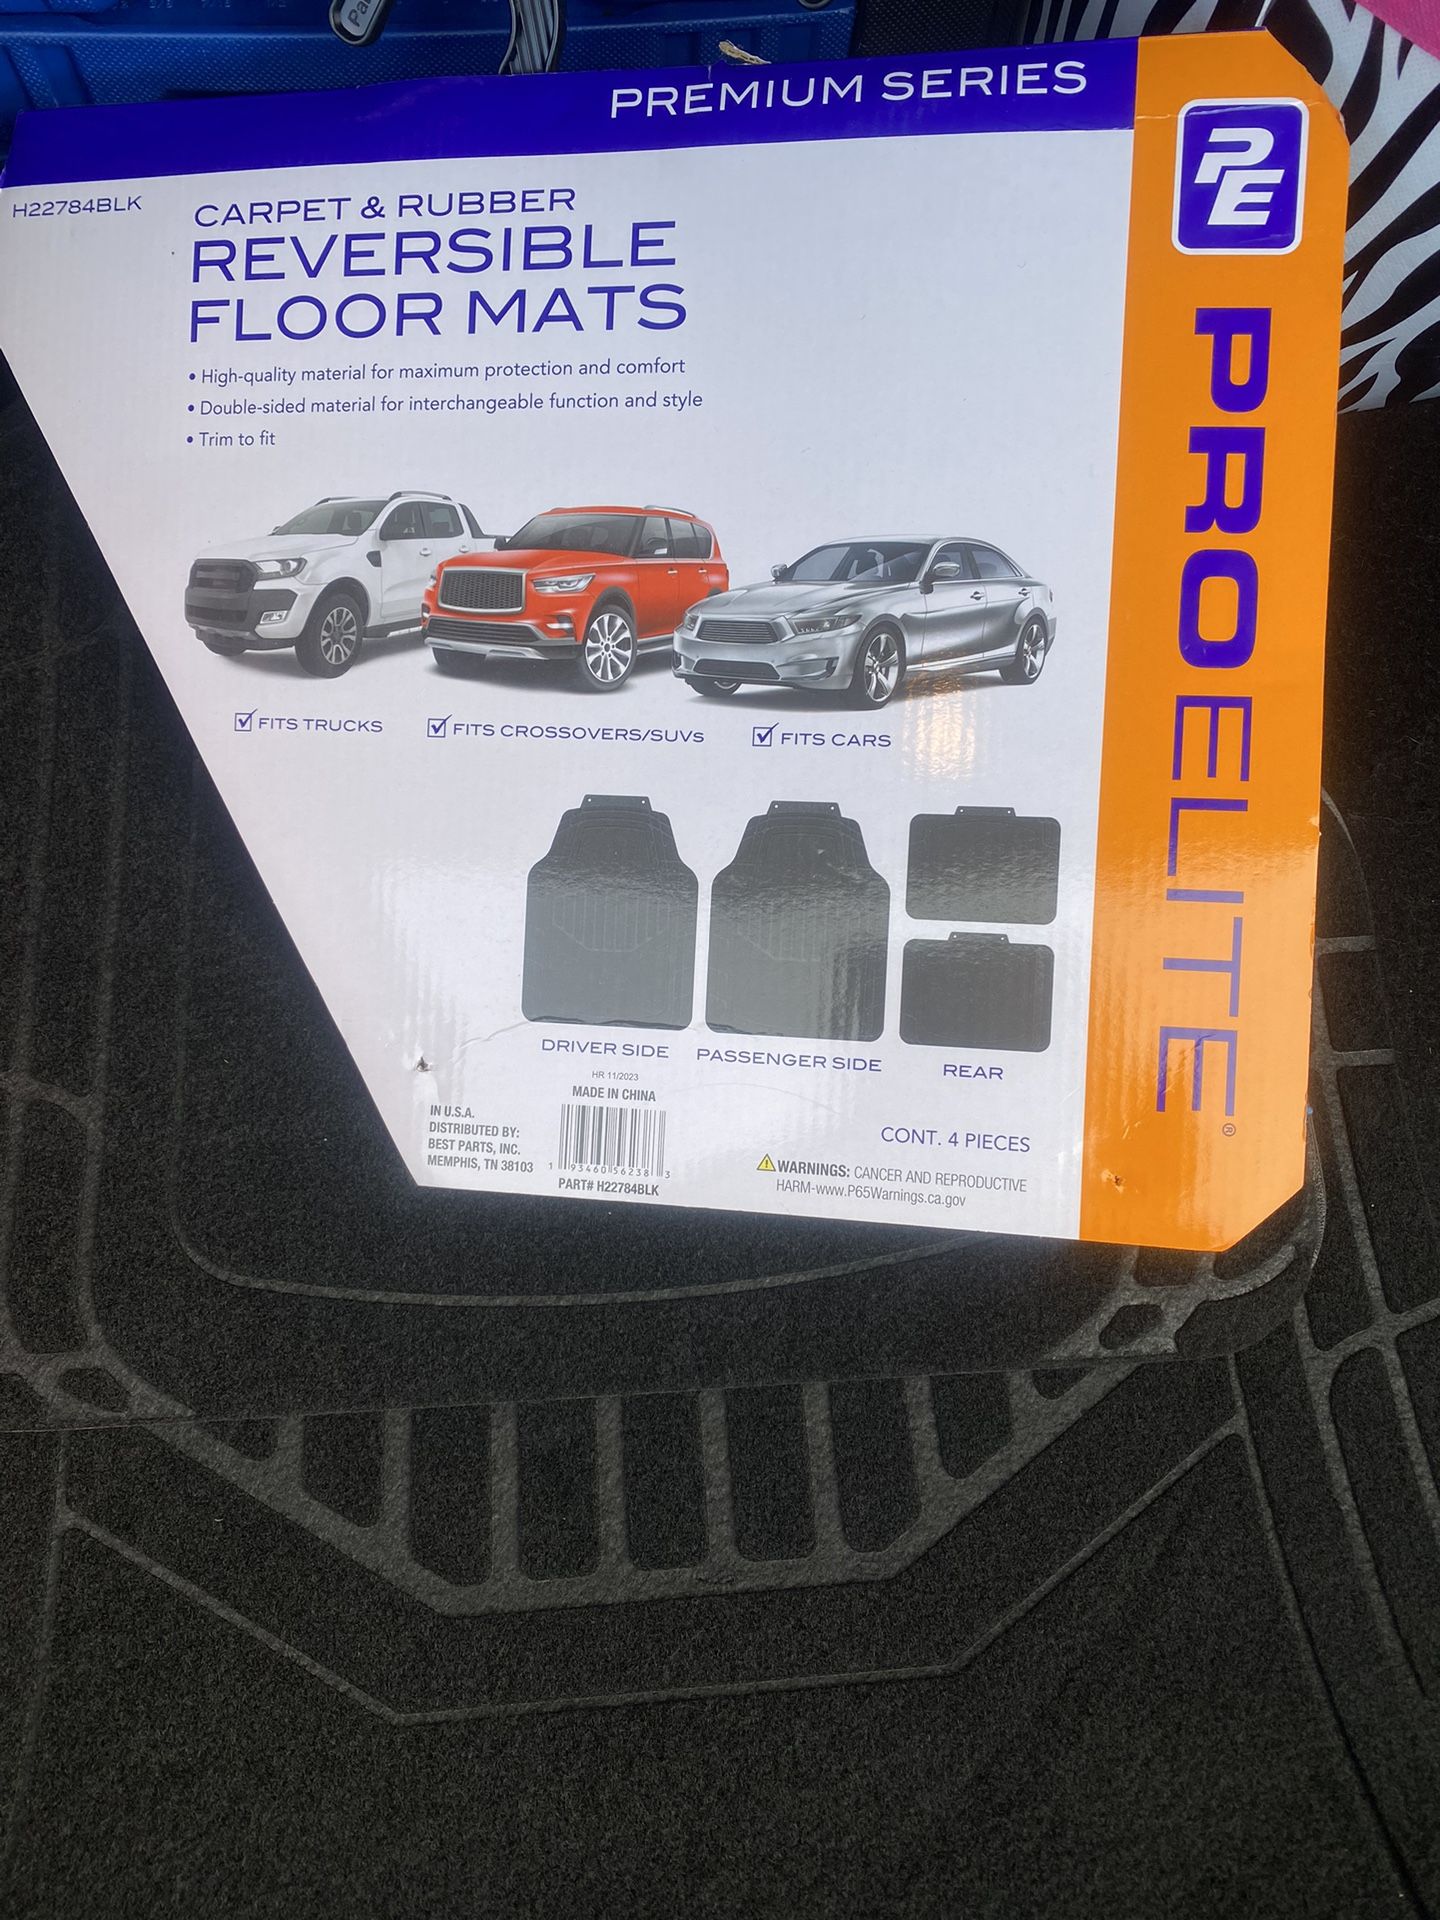 New Reversible Floor, Mats Carpet And Rubber And Black Fits Trucks, Suvs And Cars